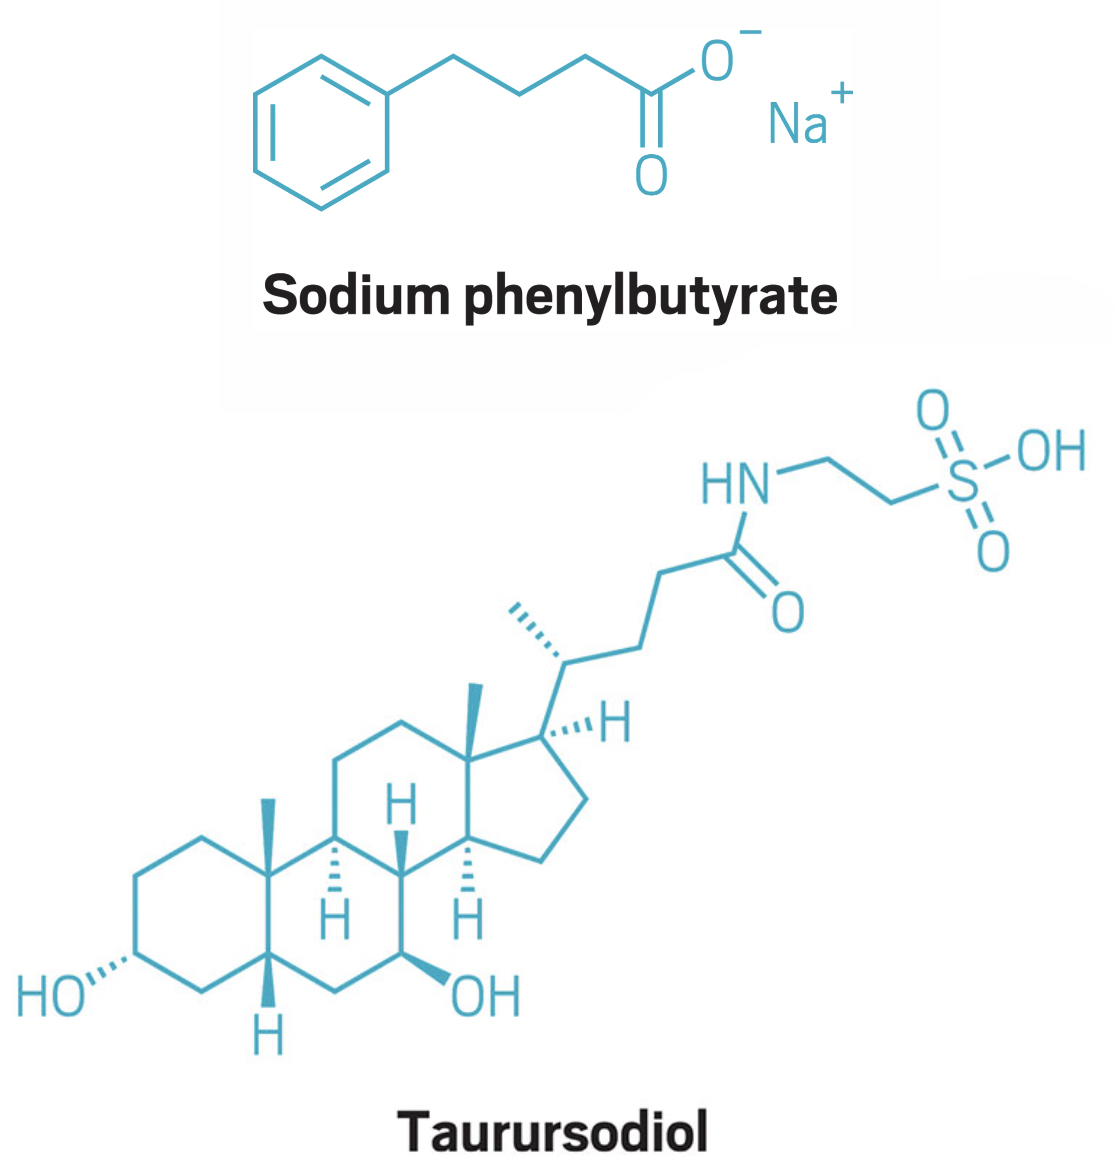 Structures of Sodium phenylbutyrate and Taurursodiol.